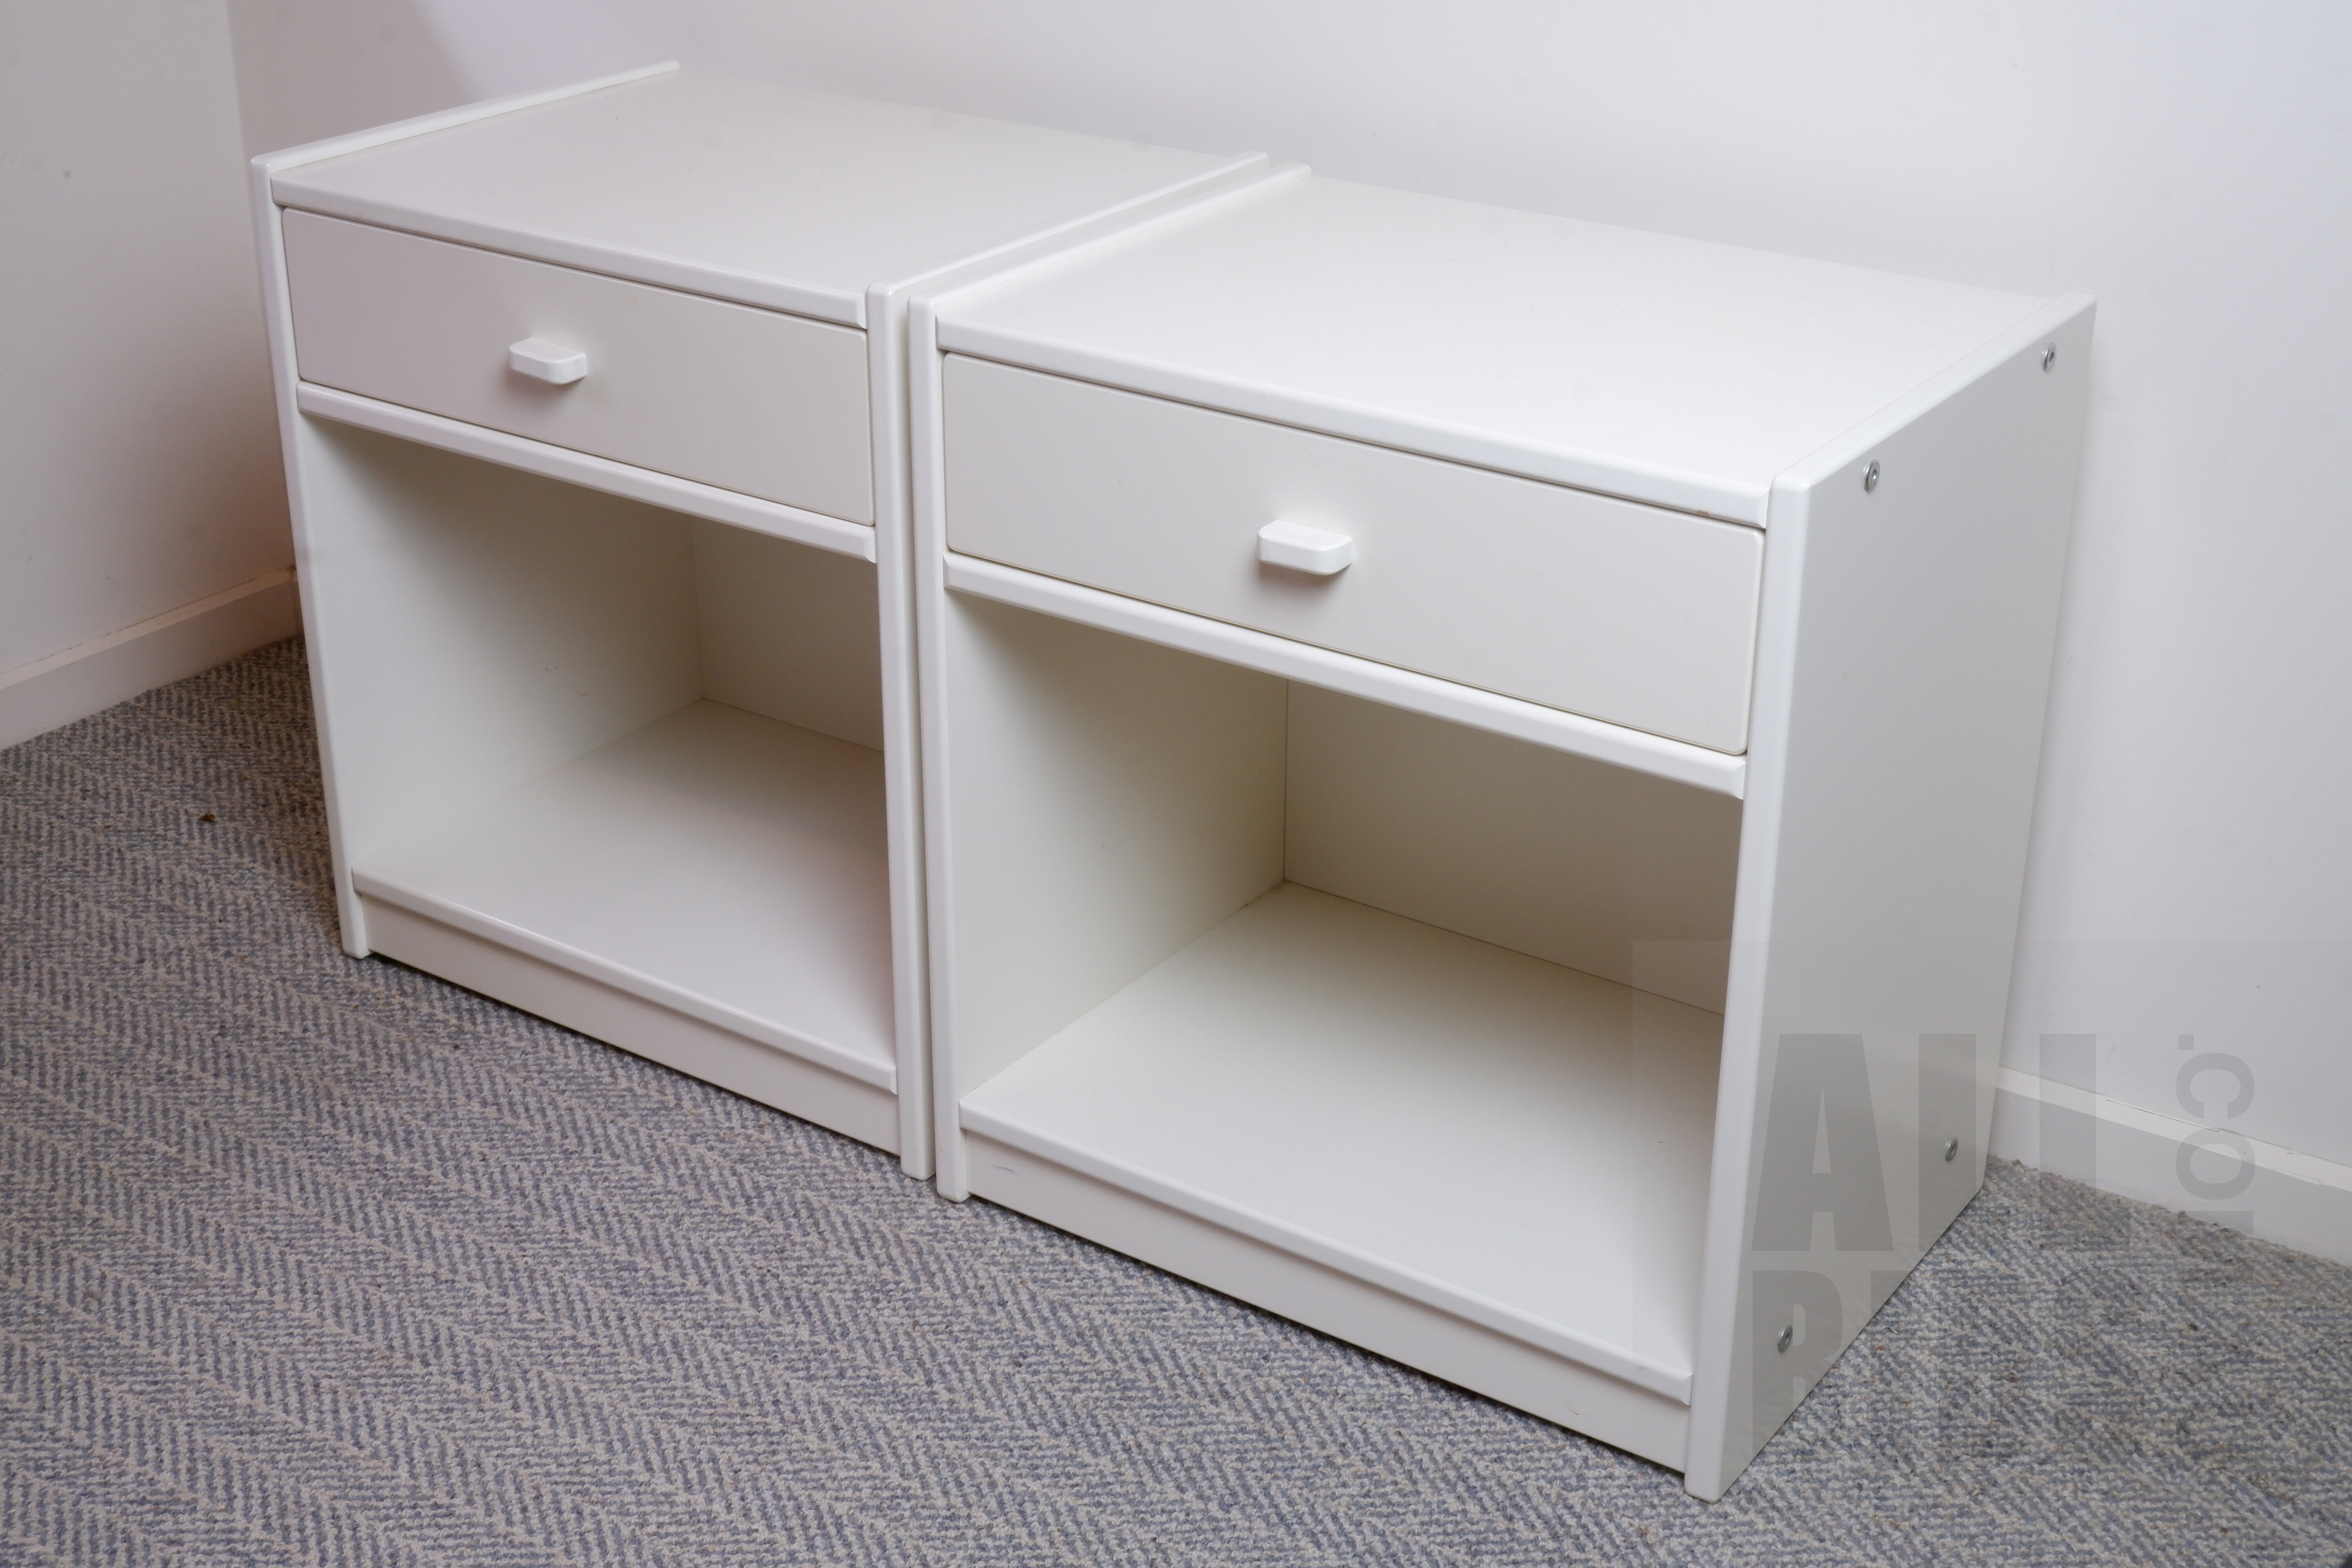 'Pair of Contemporary White Bedside Cabinets'